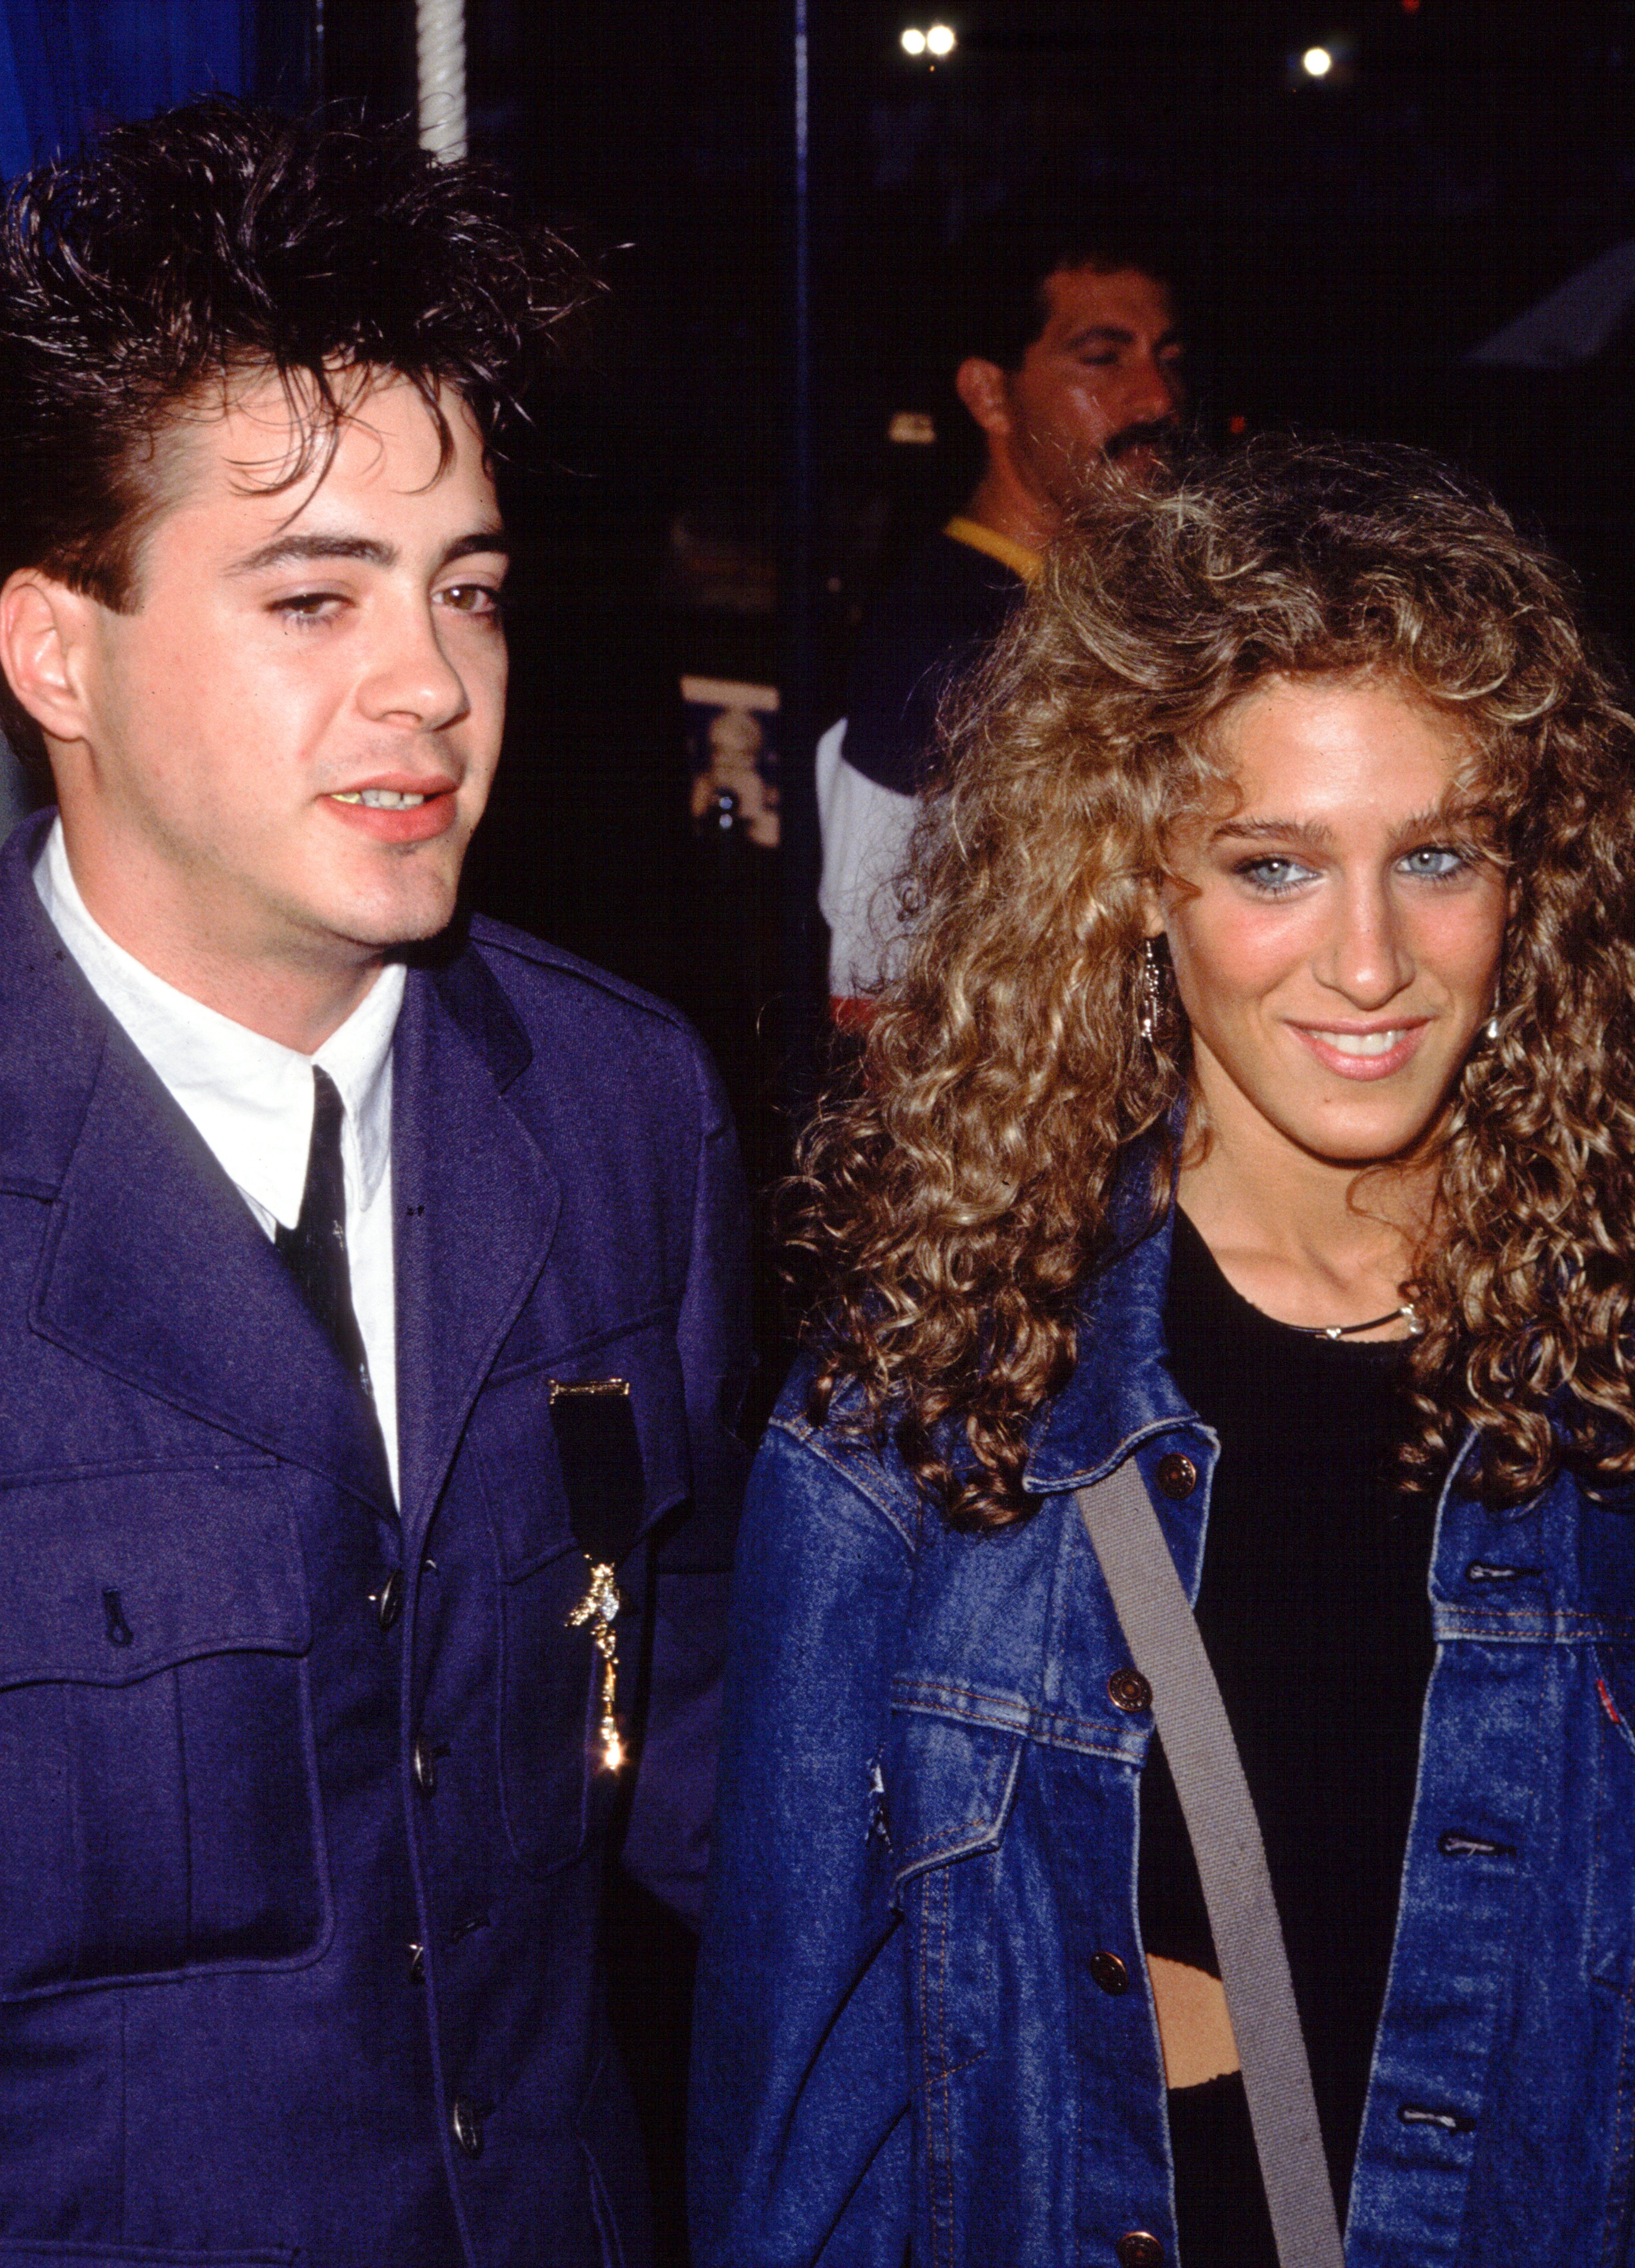 Robert Downey Jr. and Sarah Jessica Parker at the screening of the CBS Television Movie "Going for the Gold: The Bill Johnson Story," 1985, Los Angeles, California. | Photo: Getty Images